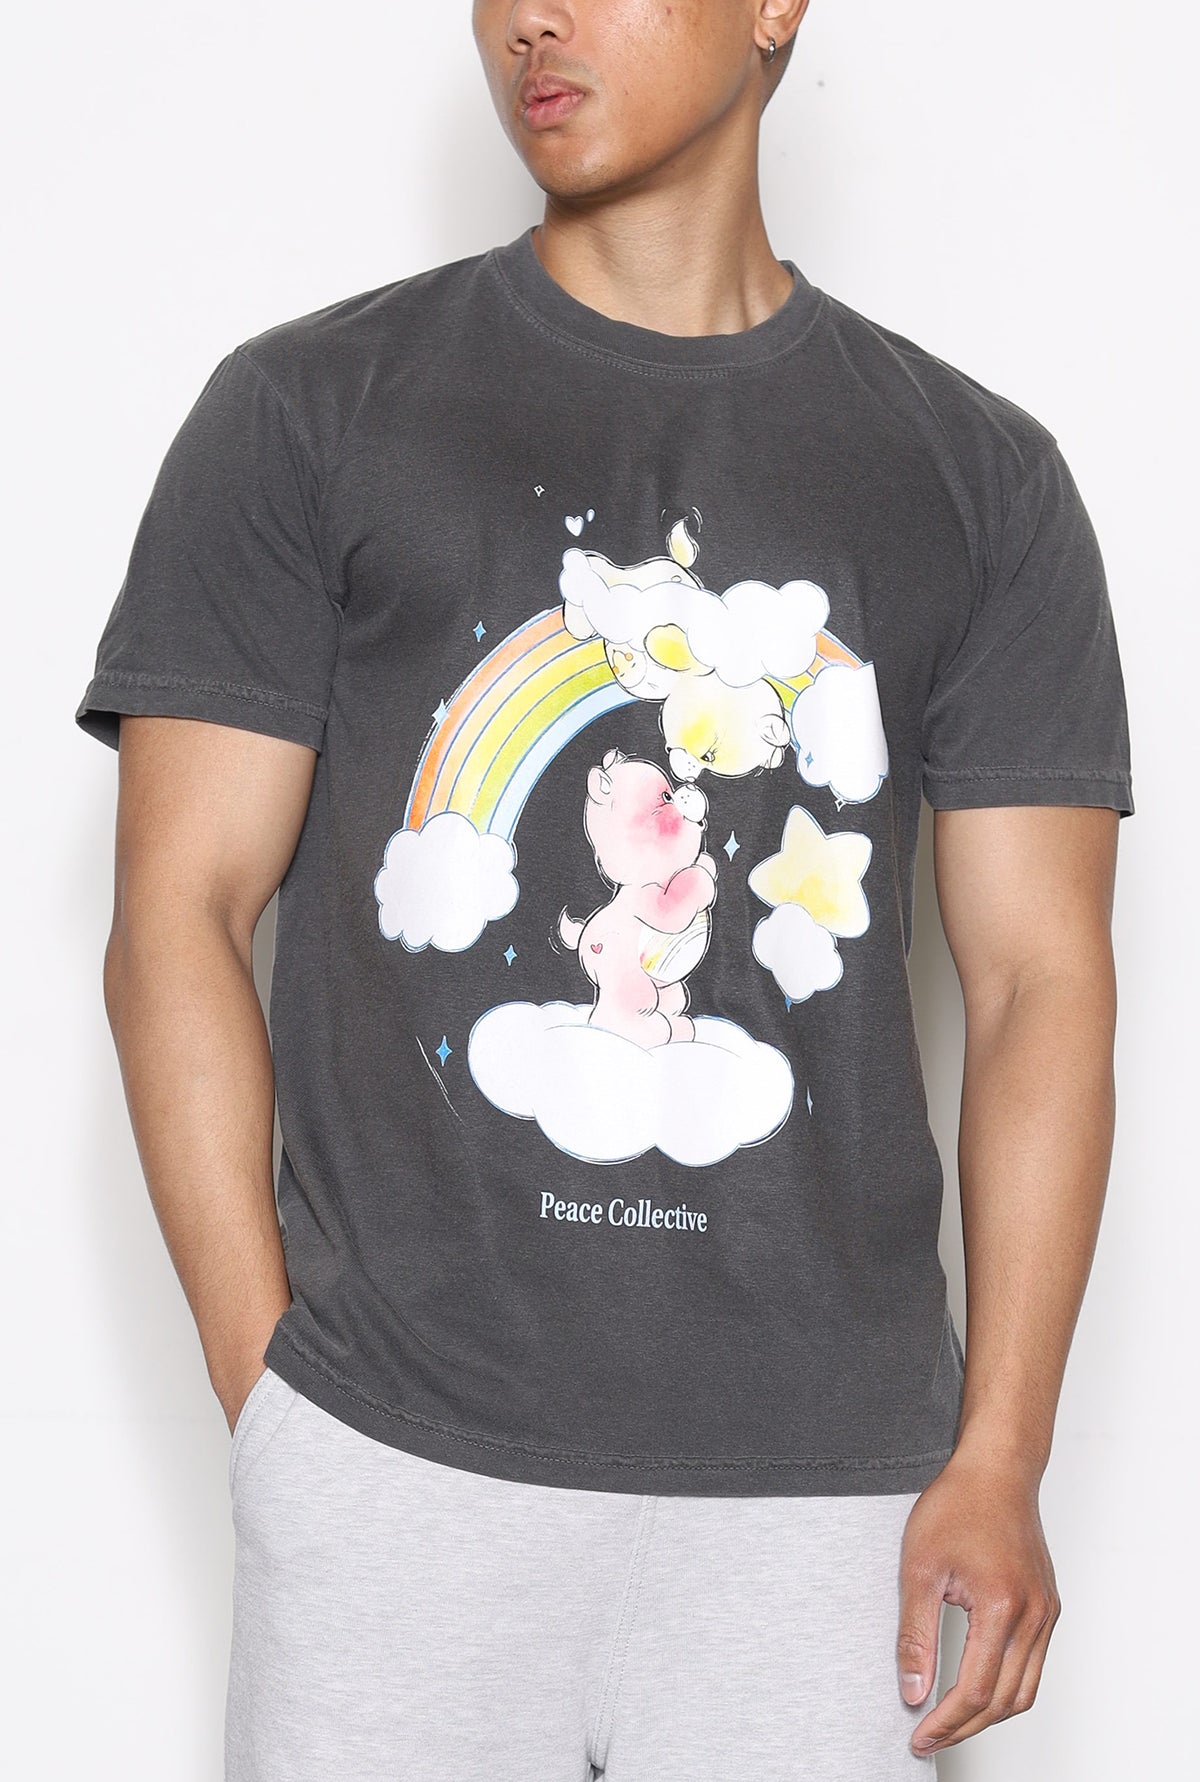 Care Bears In the Clouds T Shirt - Black